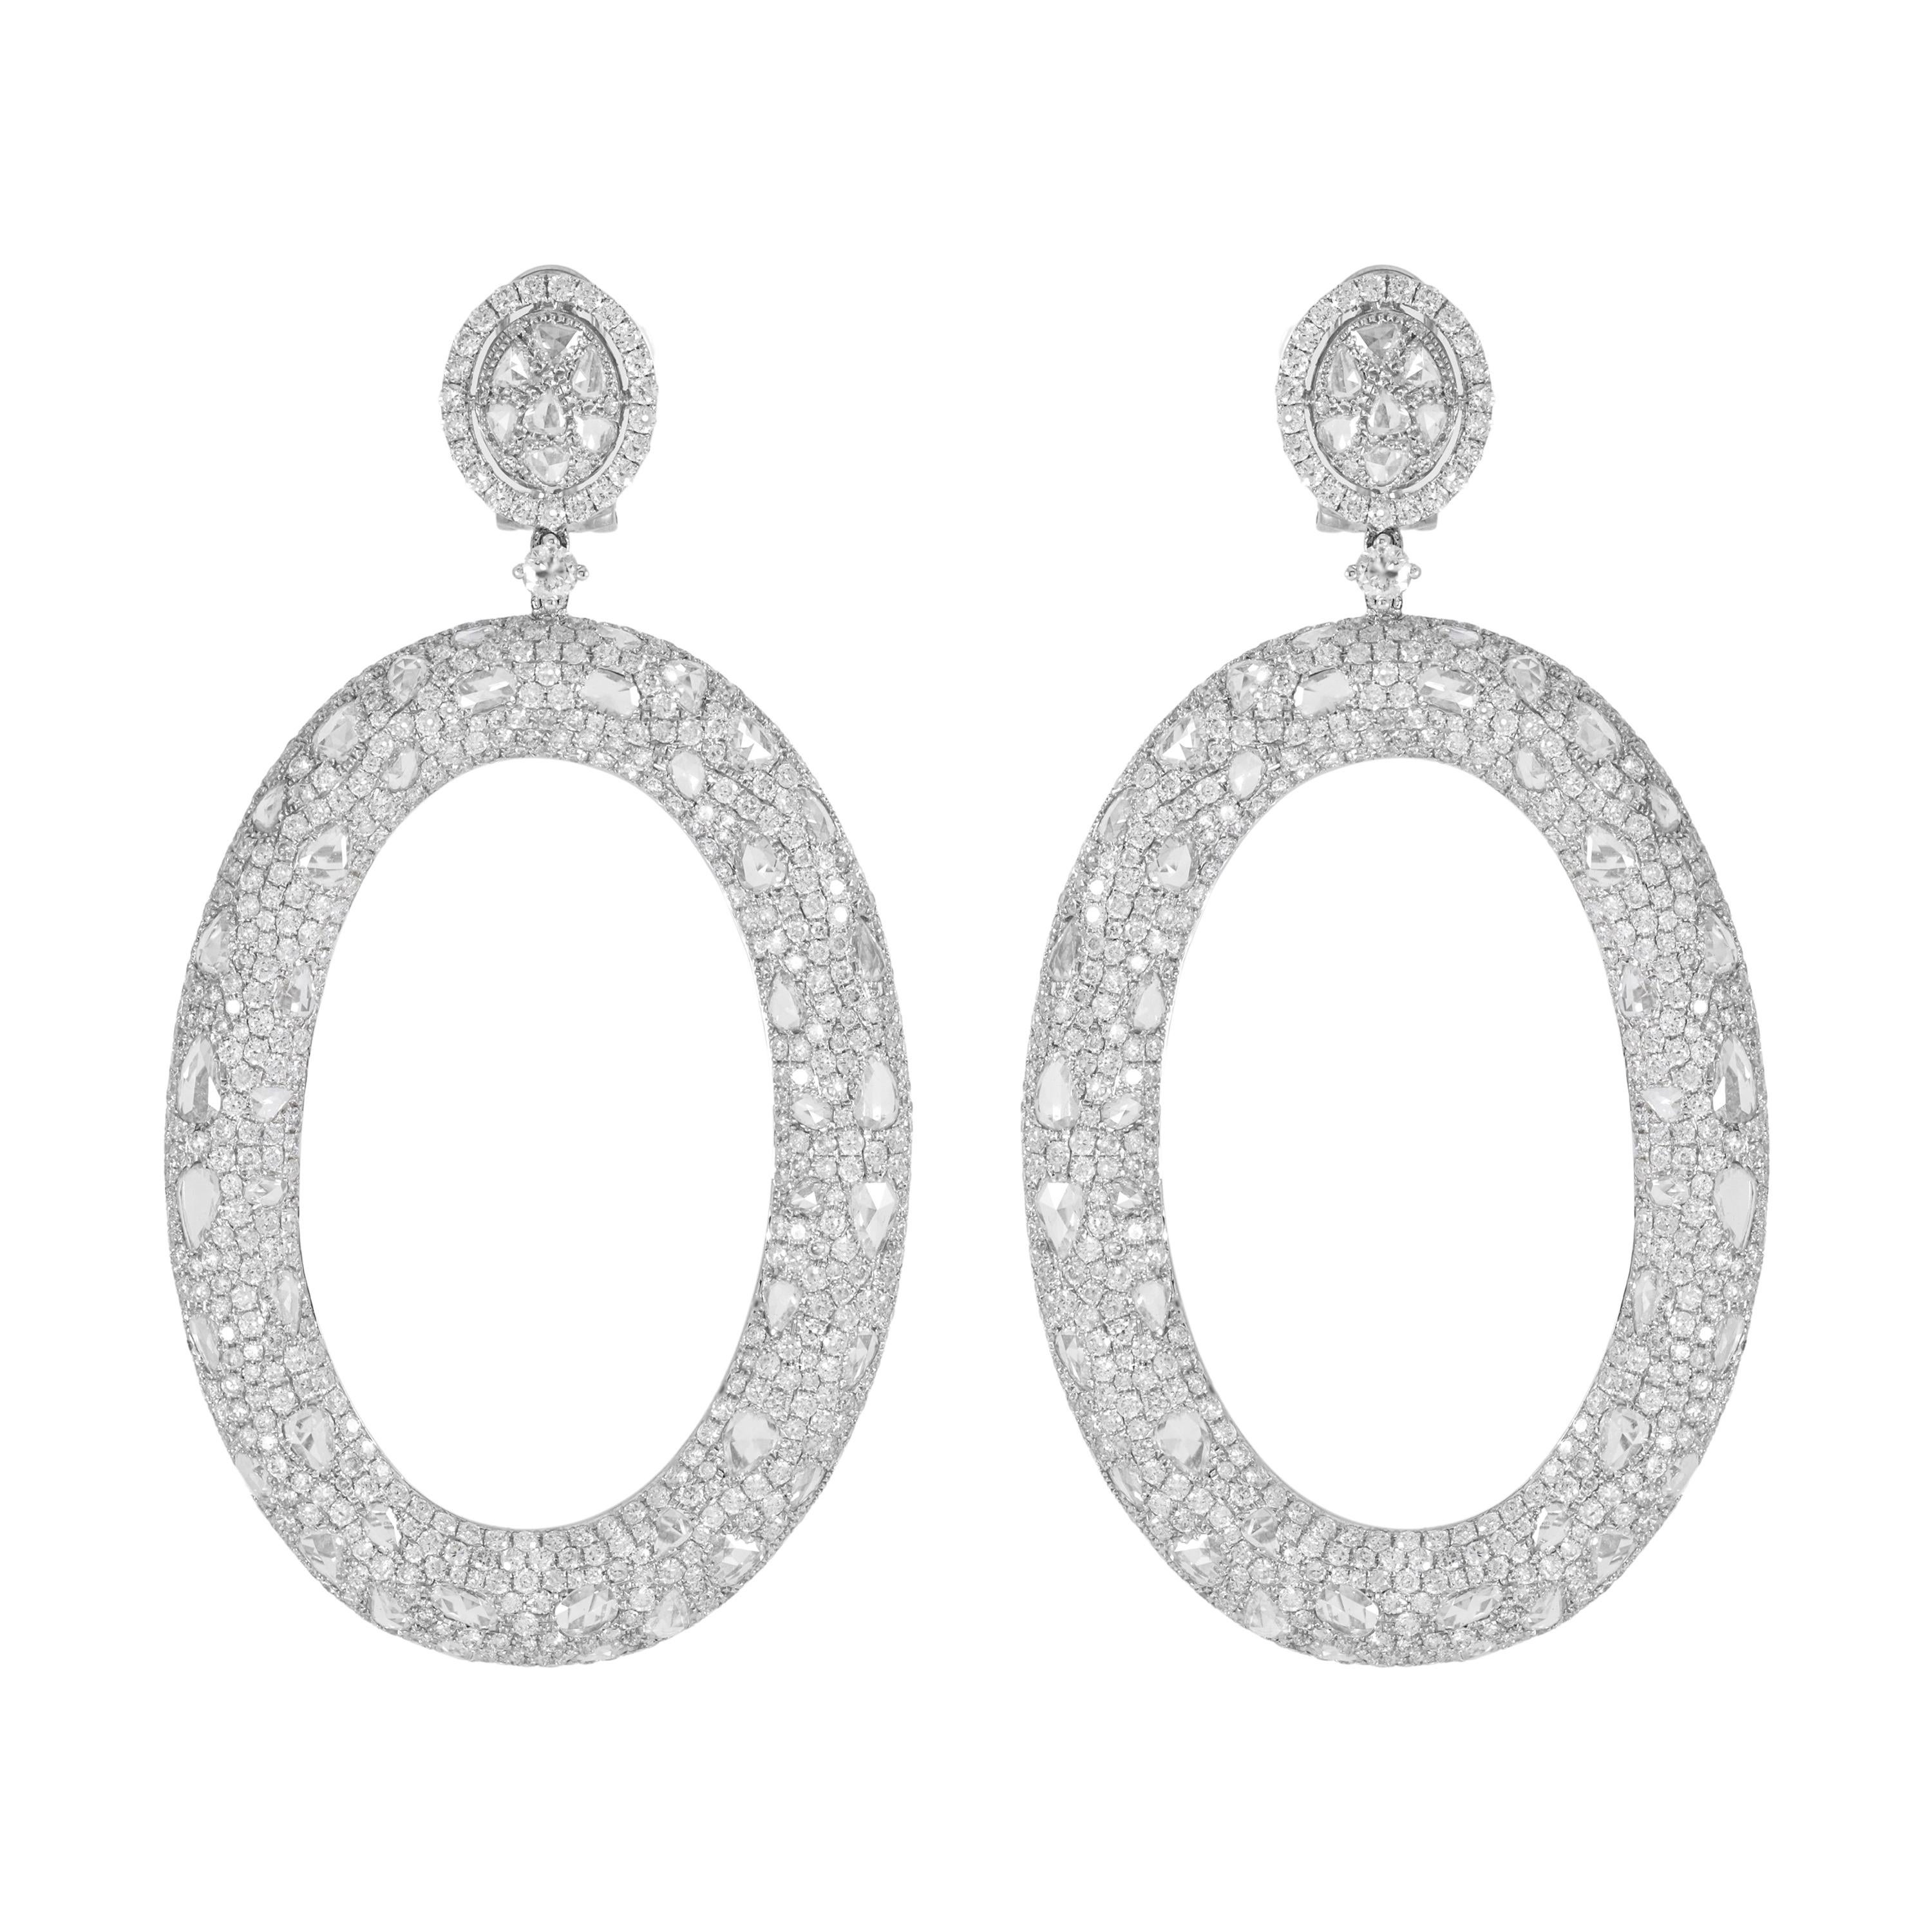 18k White Gold Diamond Earrings with 17.97 Carats of Rose and Round Cut Diamonds